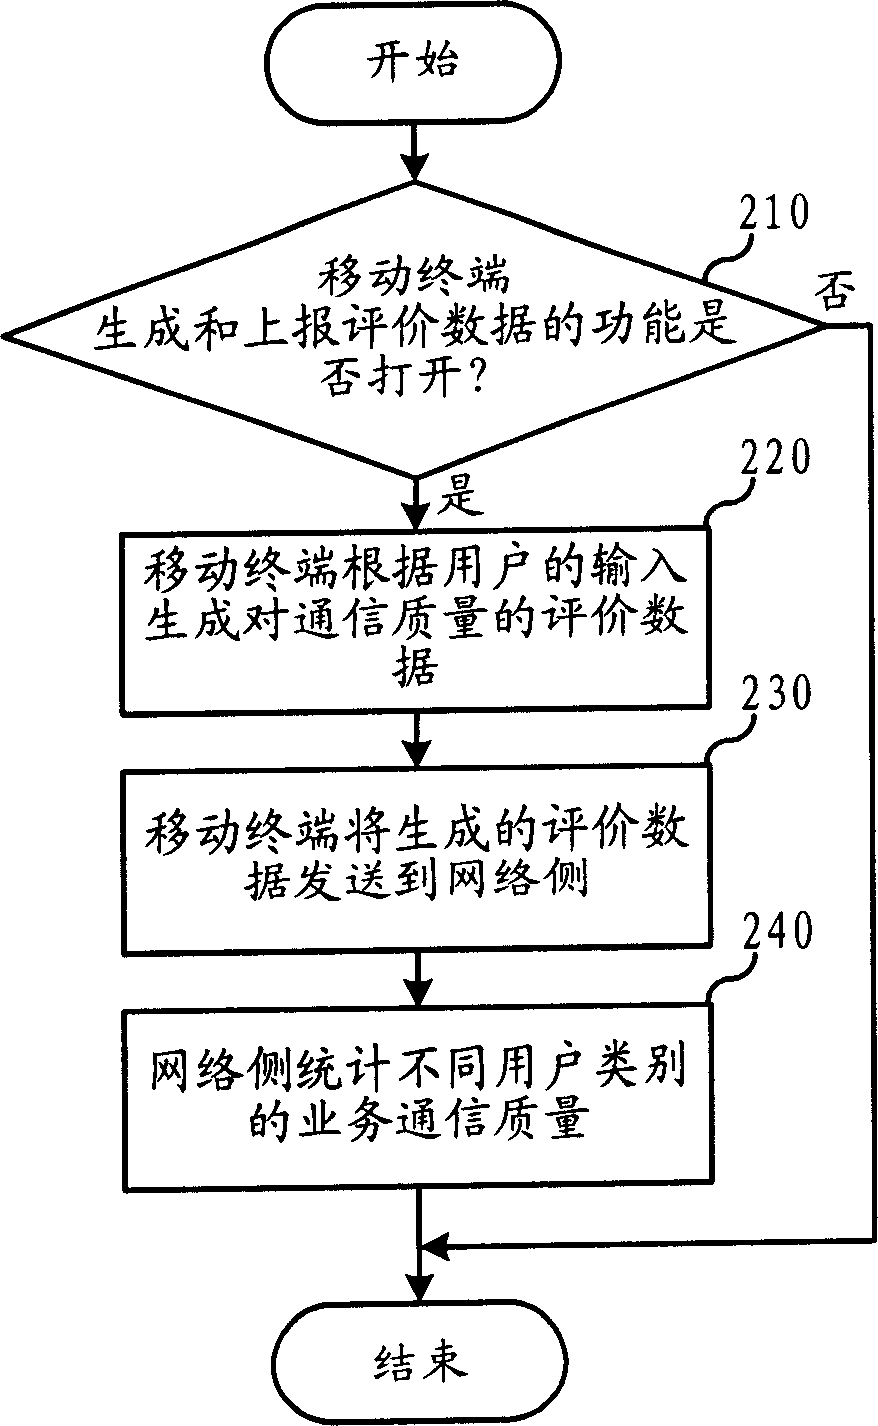 Statistic method for communication service quality and its system terminal